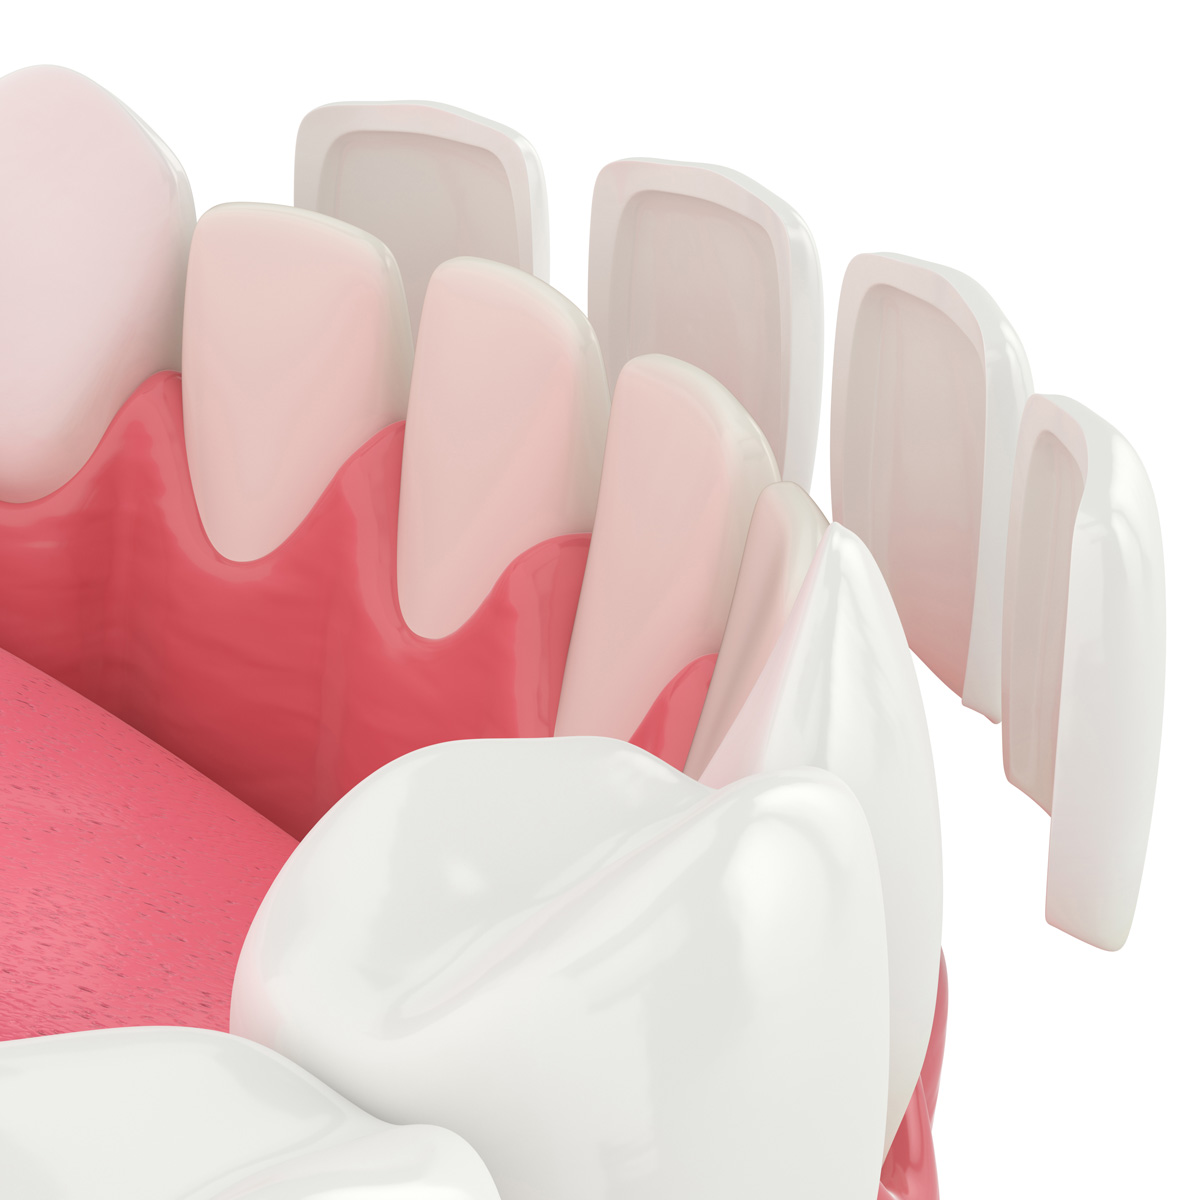 Find Out More About Porcelain Veneers Near Me in Knoxville, TN